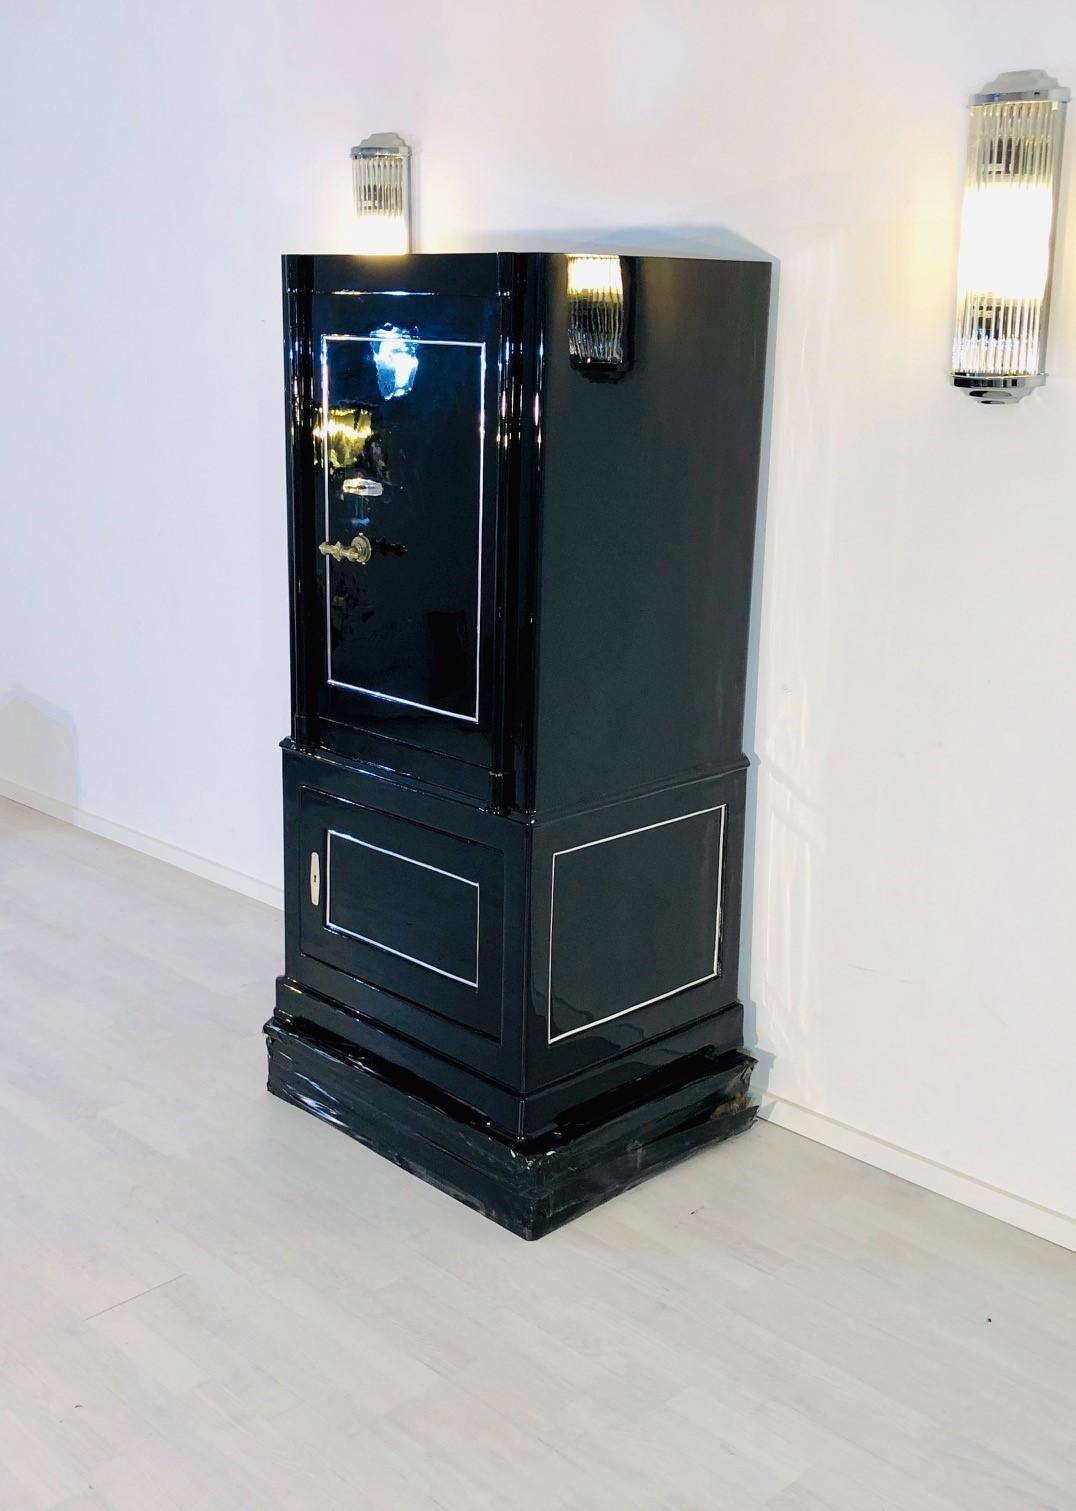 Stunning 1930s black lacquer safe or vault from Switzerland. We got the original item from a mansion of a banker in Zurich who got it from the security company C.A. Streuli in St.Gallen, Switzerland. It got restored in our manufactory and newly